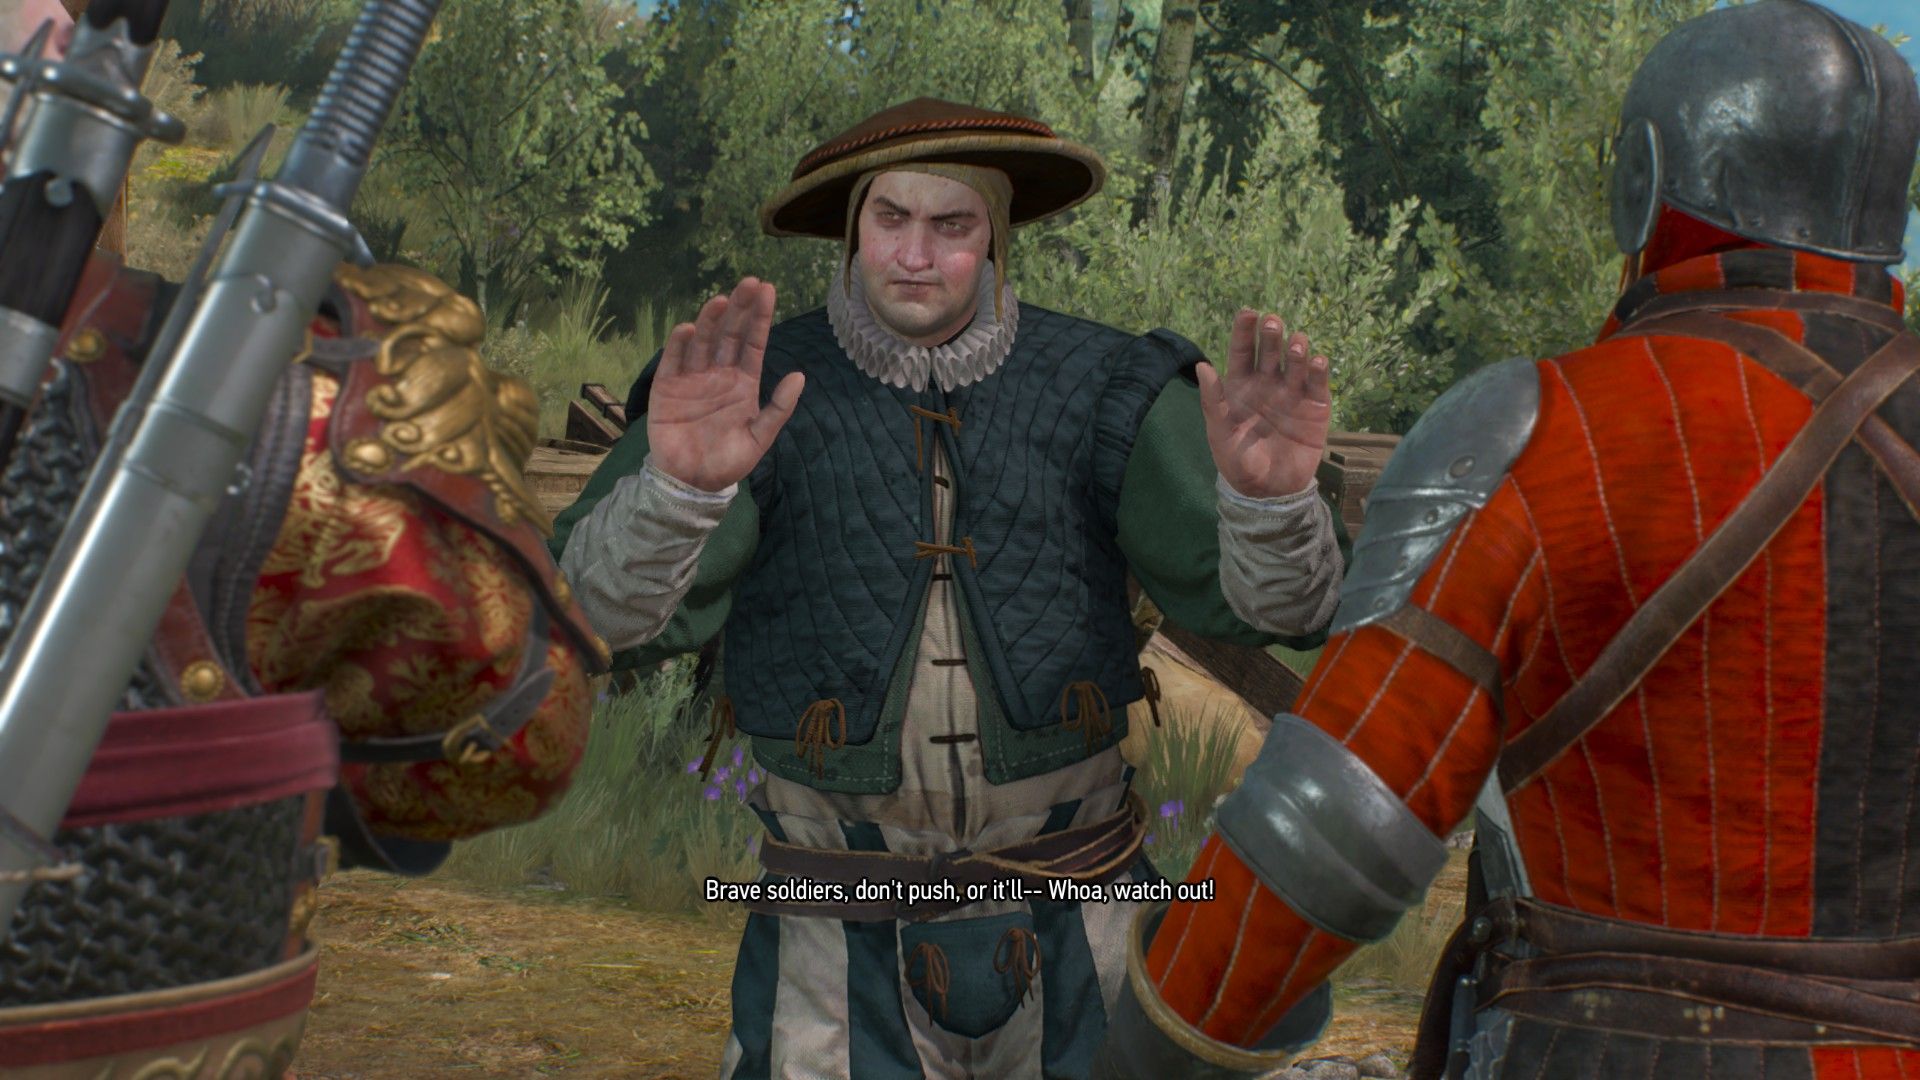 A merchant puts his hands up, trying to calm an angry soldier down in The Witcher 3.